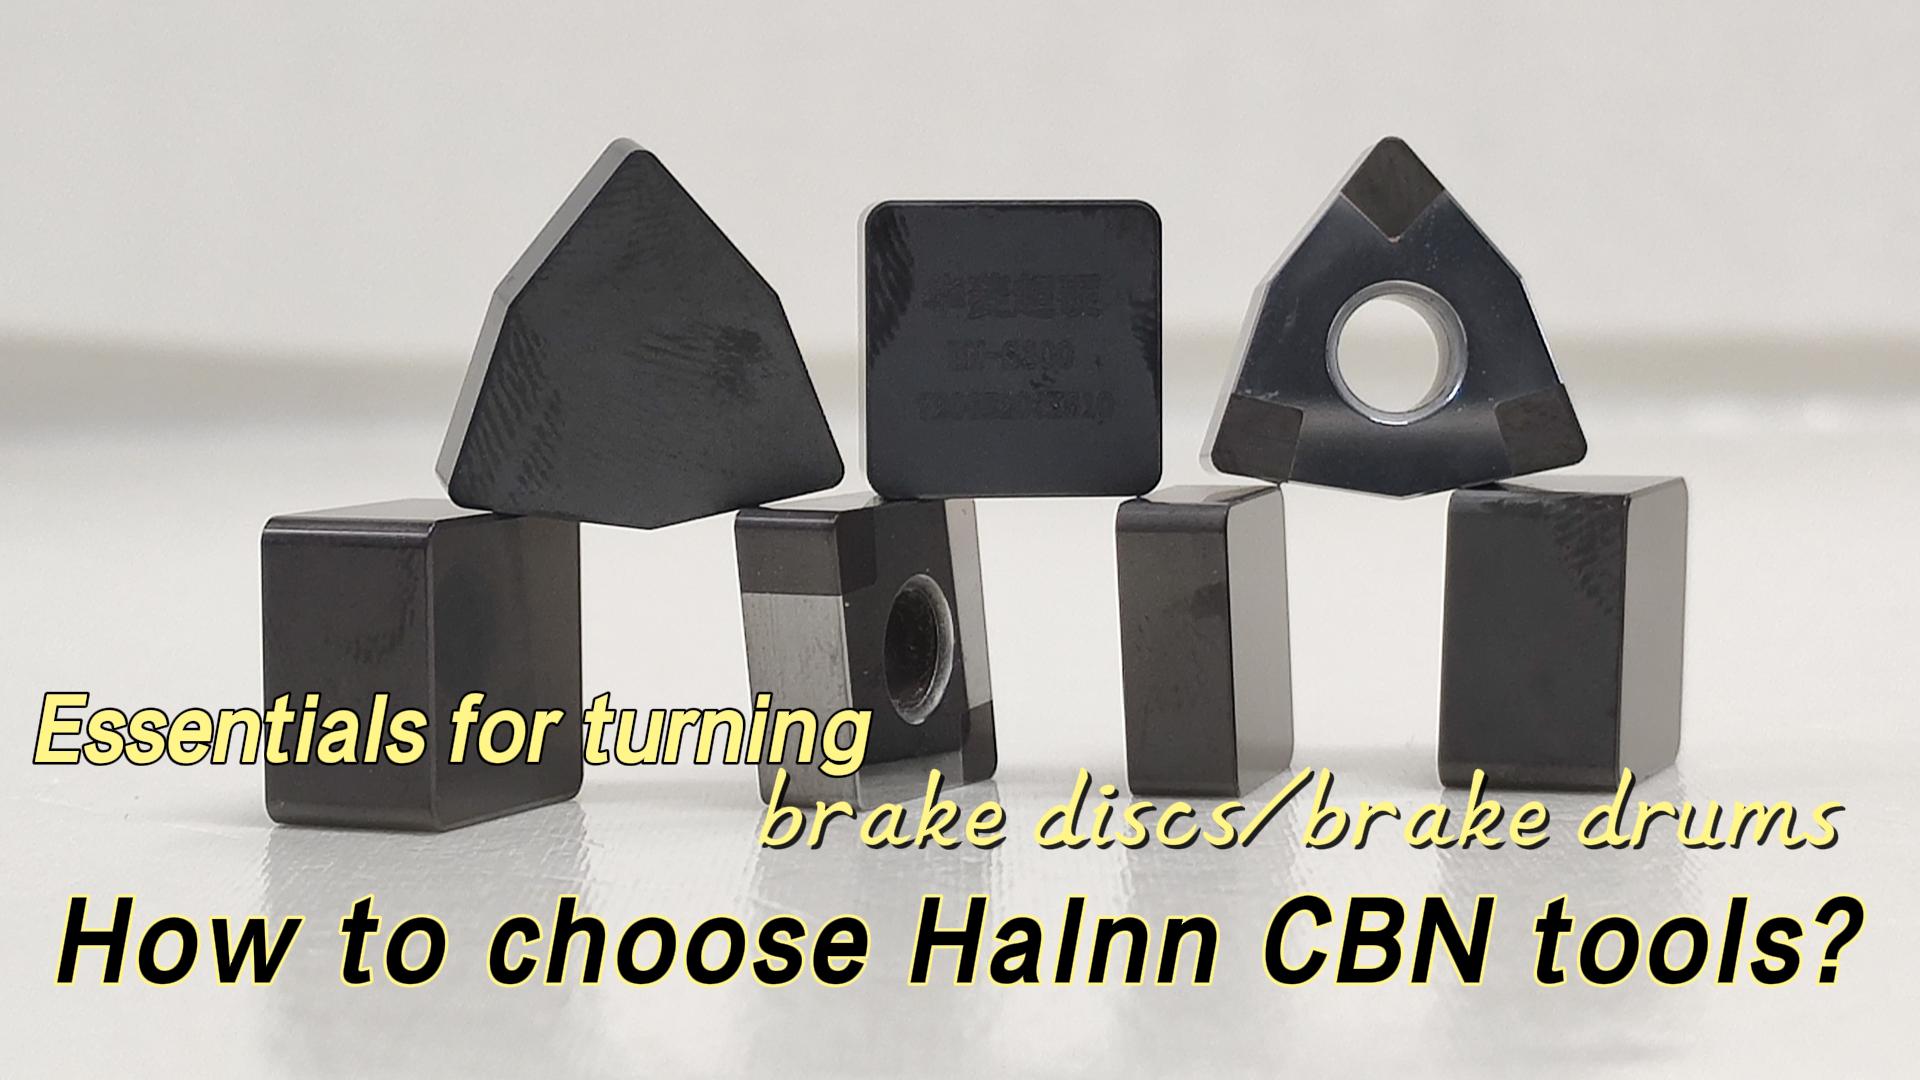 CBN tool turning brake disk video (三) - Halnn CBN tool selection and application guide